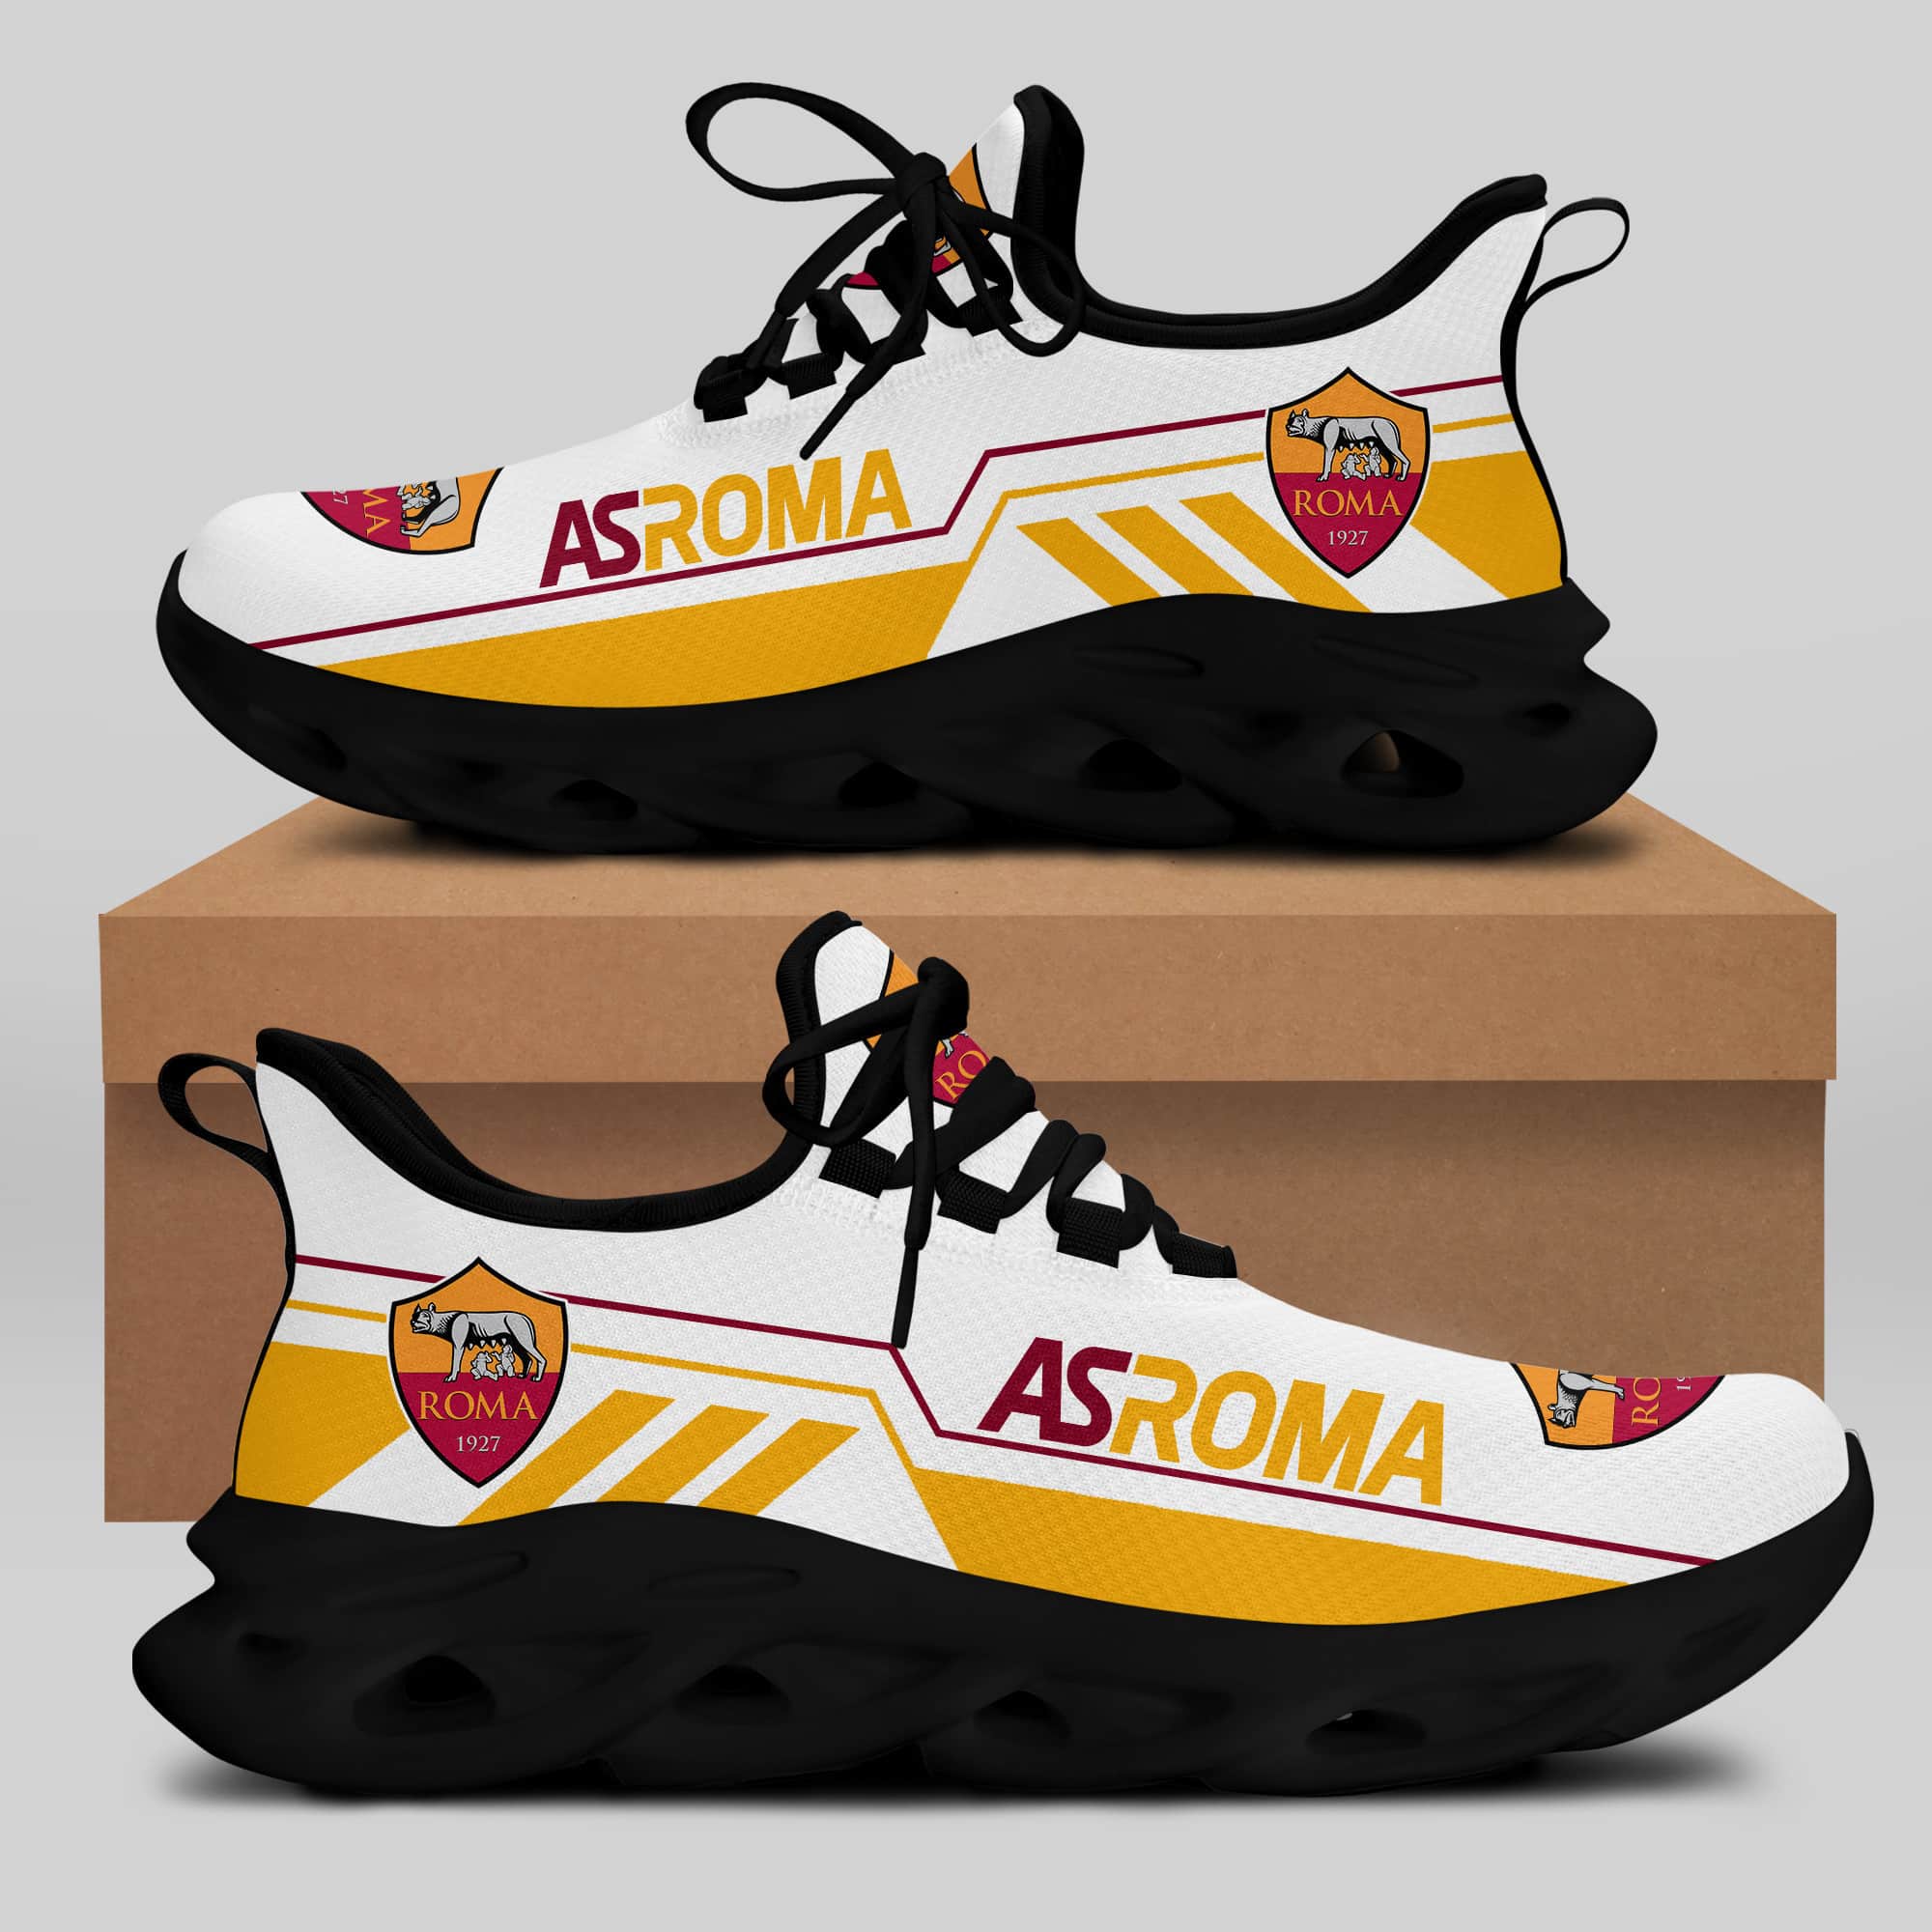 As Roma Running Shoes Max Soul Shoes Sneakers Ver 22 2